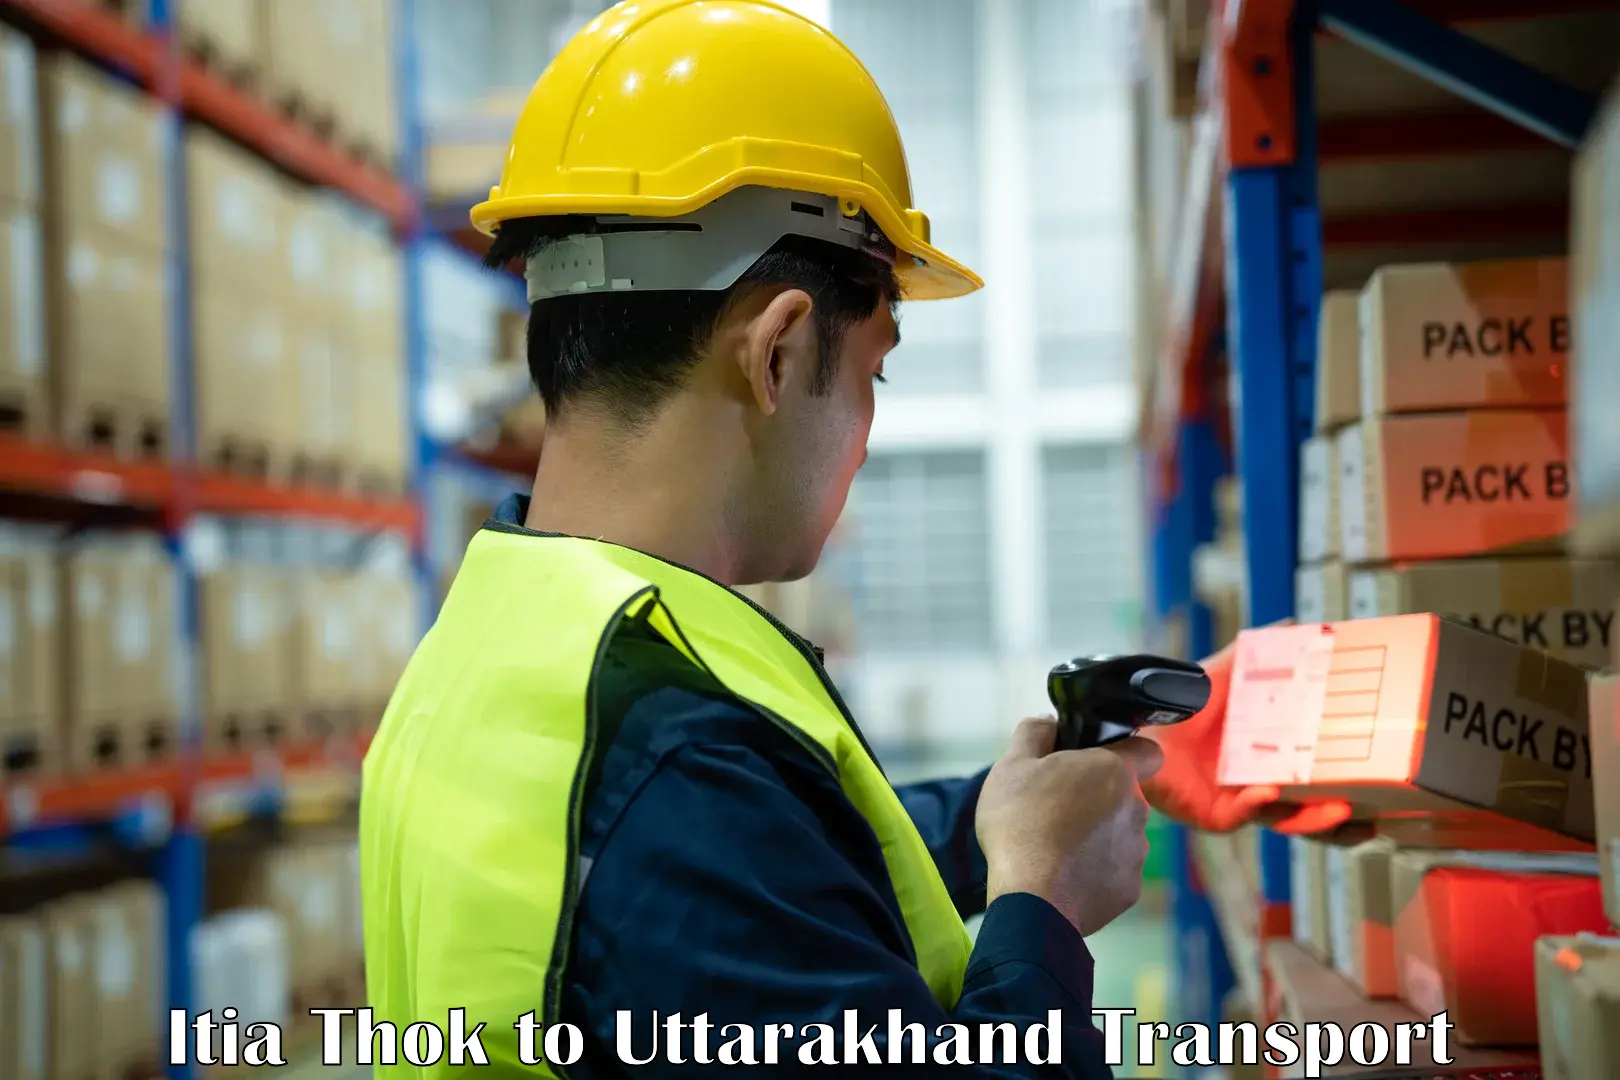 Shipping services Itia Thok to Mussoorie